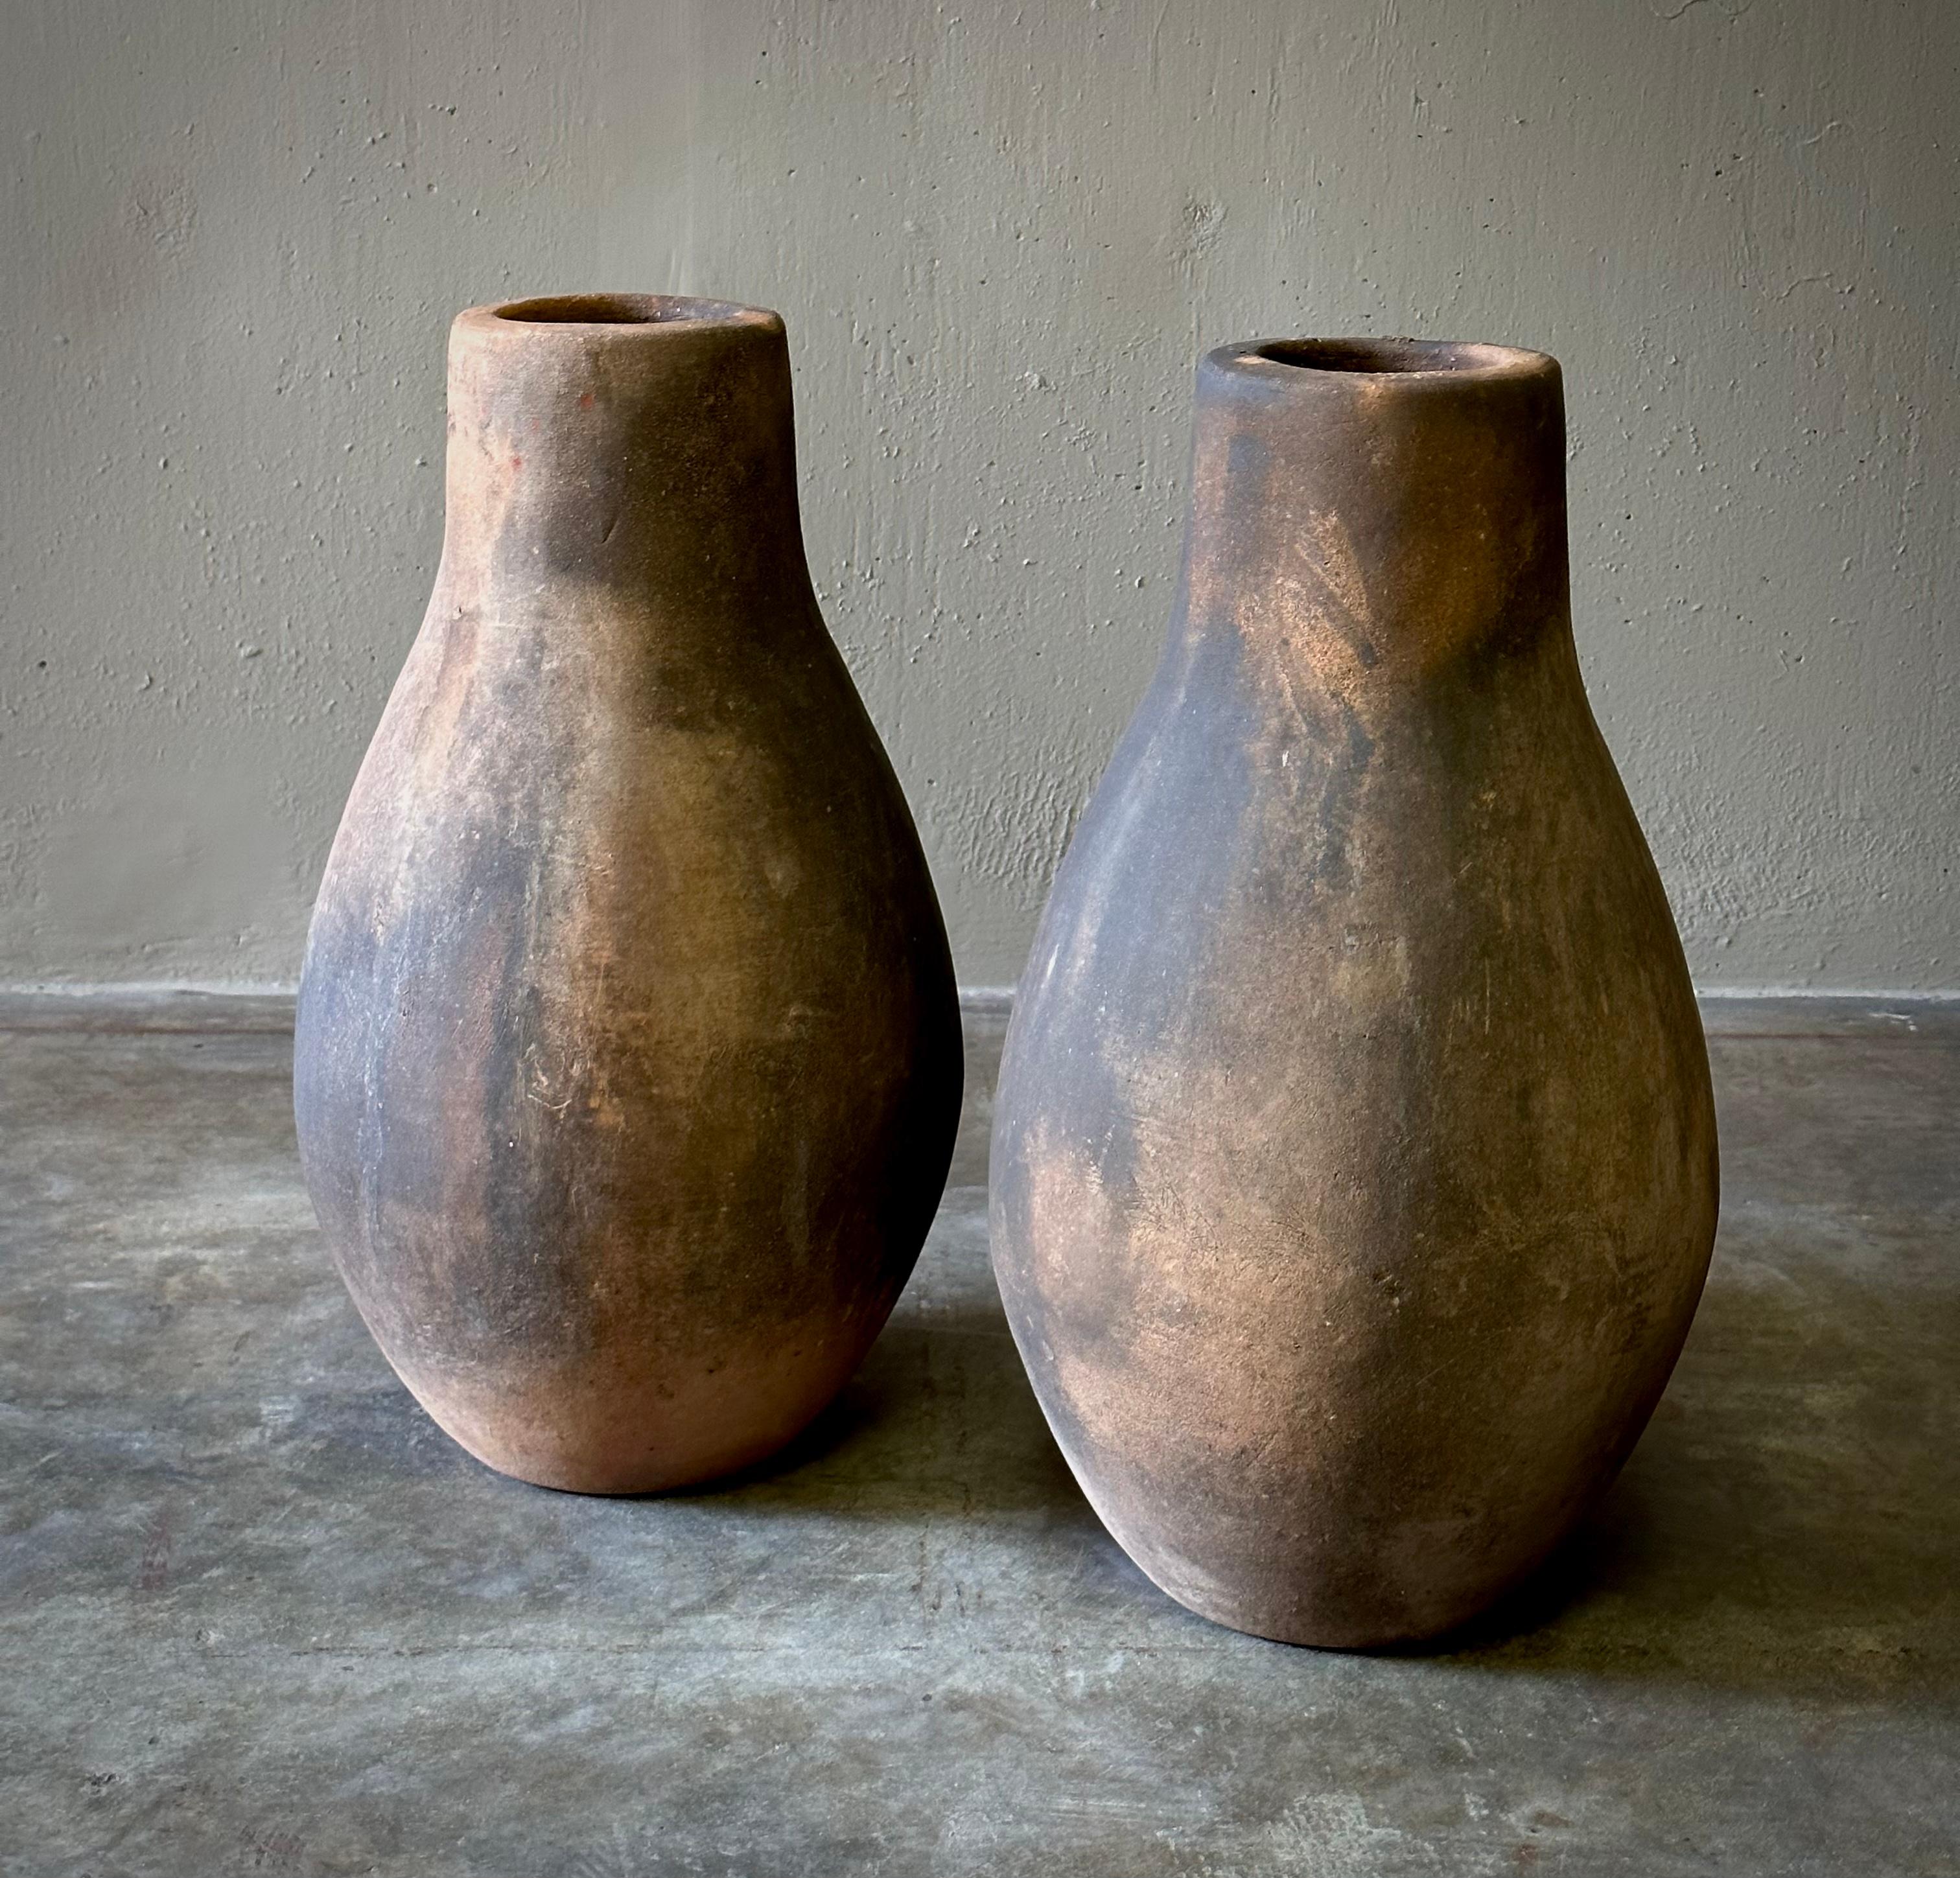 Pair of decorative terracotta vessels from Jalisco, Mexico with simple, elongated shape and smoky, rustic patina. Wonderful displayed as a pair or separately. 

